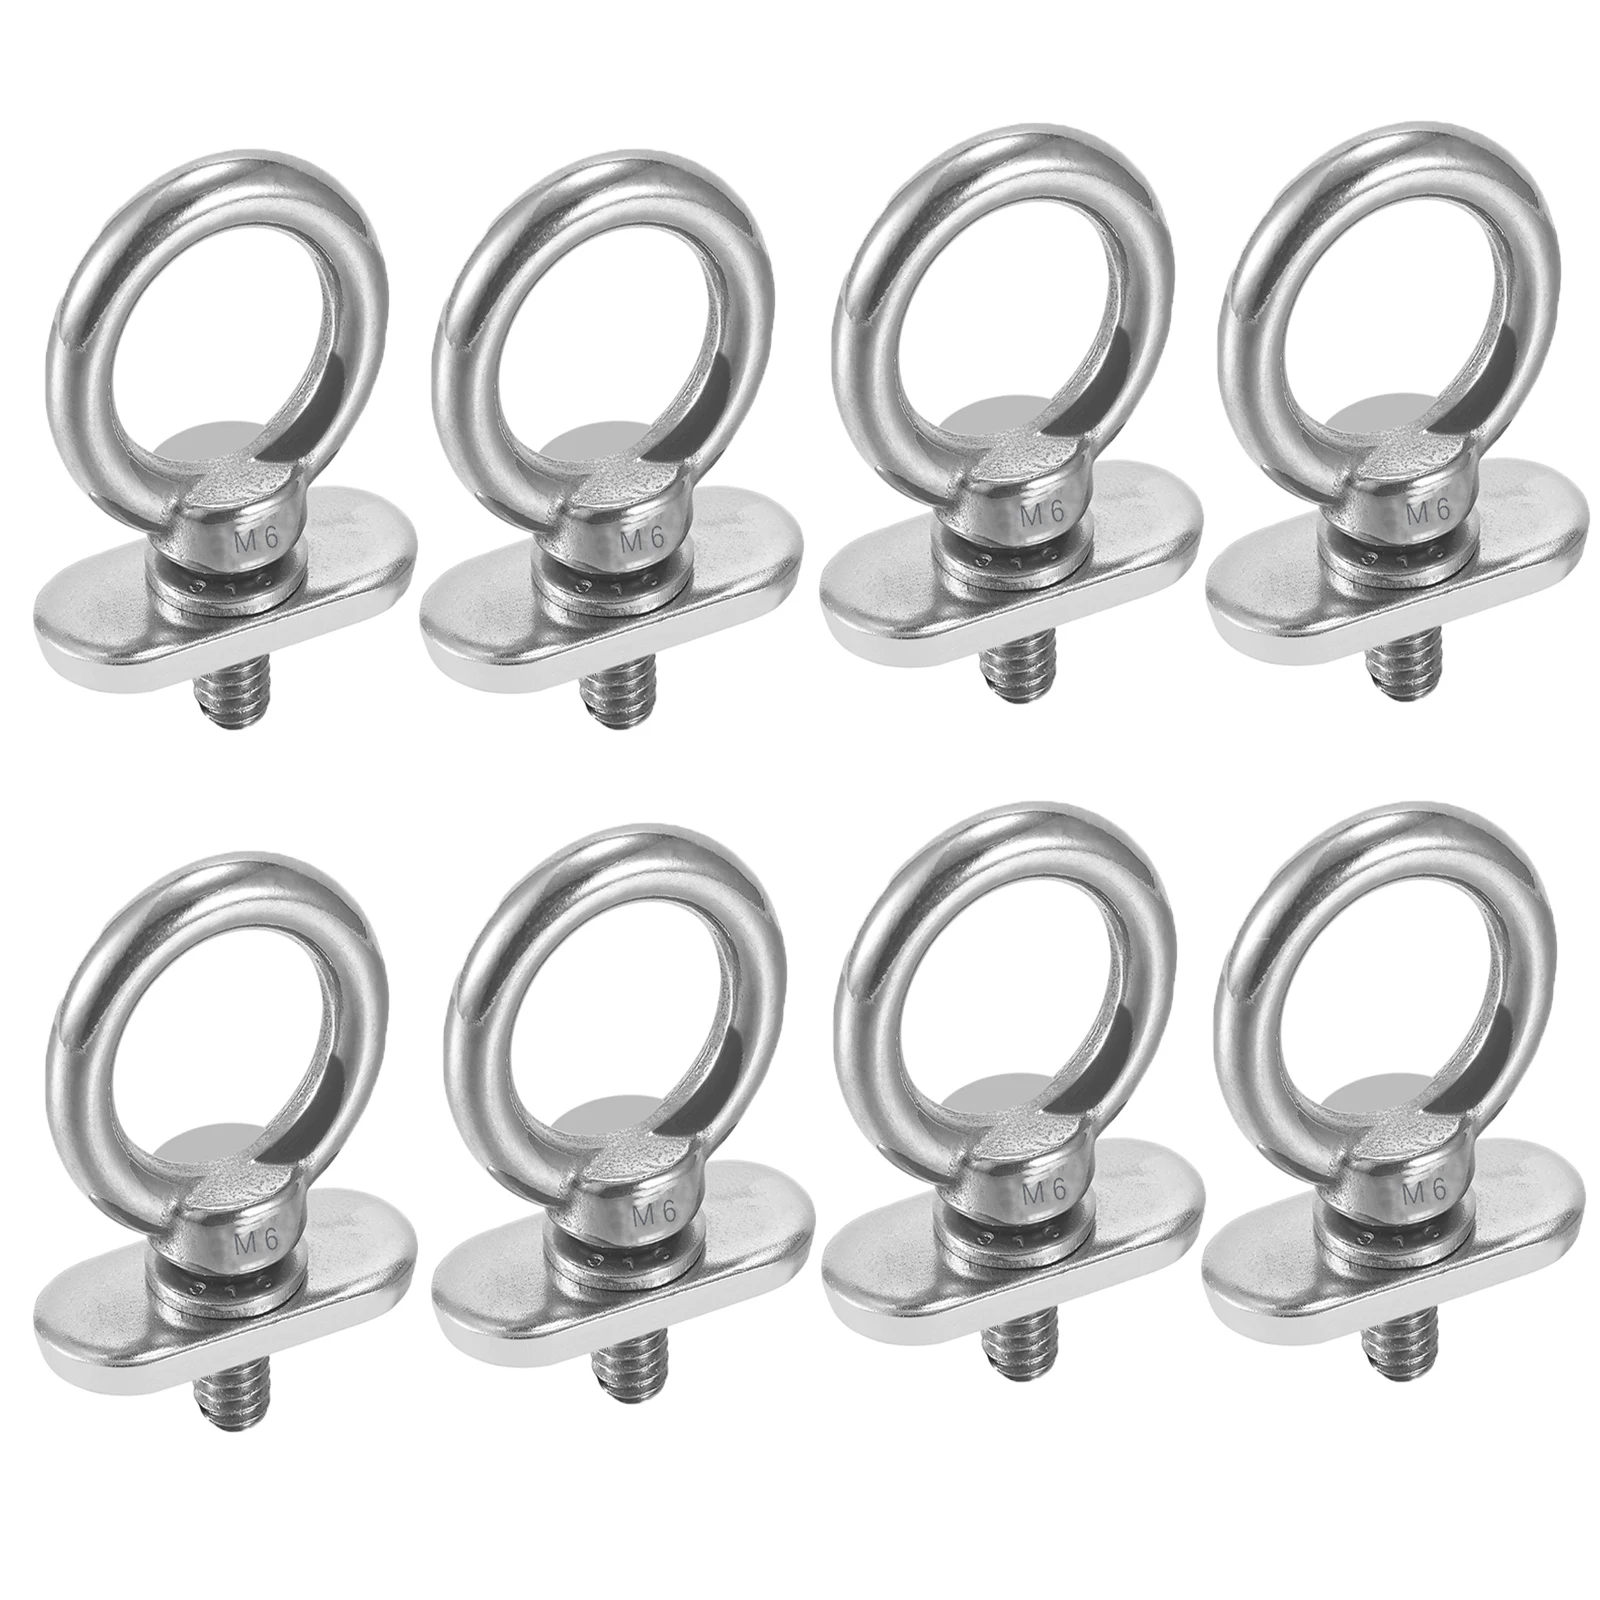 Track Mount Tie Down Eyelets, M6 Bolt (8 Packs), 316 Stainless Steel, Kayak Track Accessories